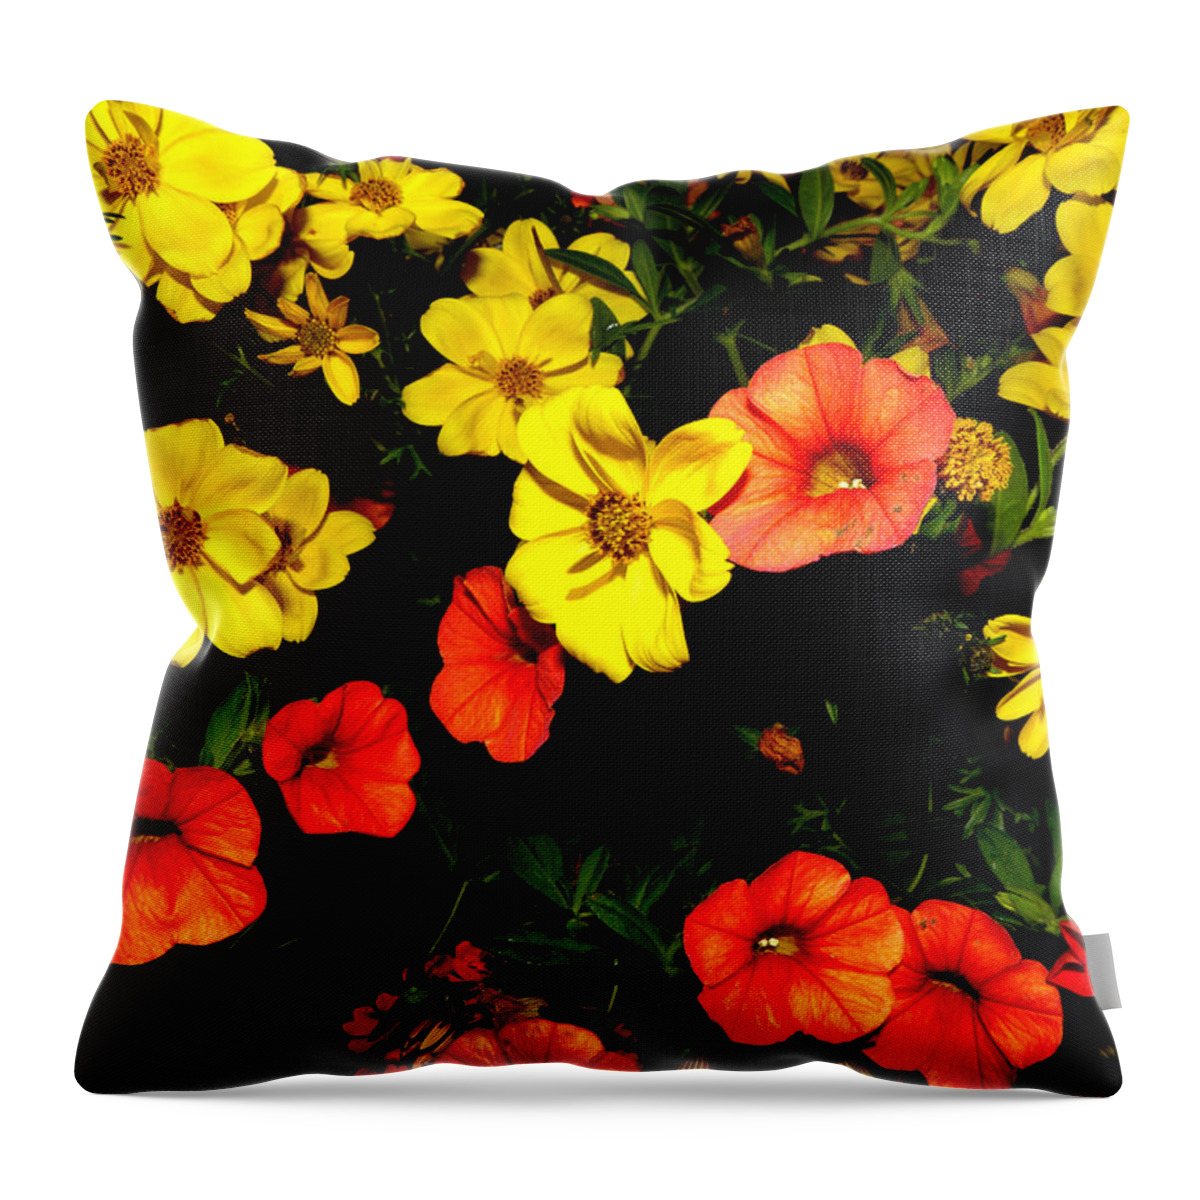 Flowers Throw Pillow featuring the photograph Fire Colors by Kim Galluzzo Wozniak